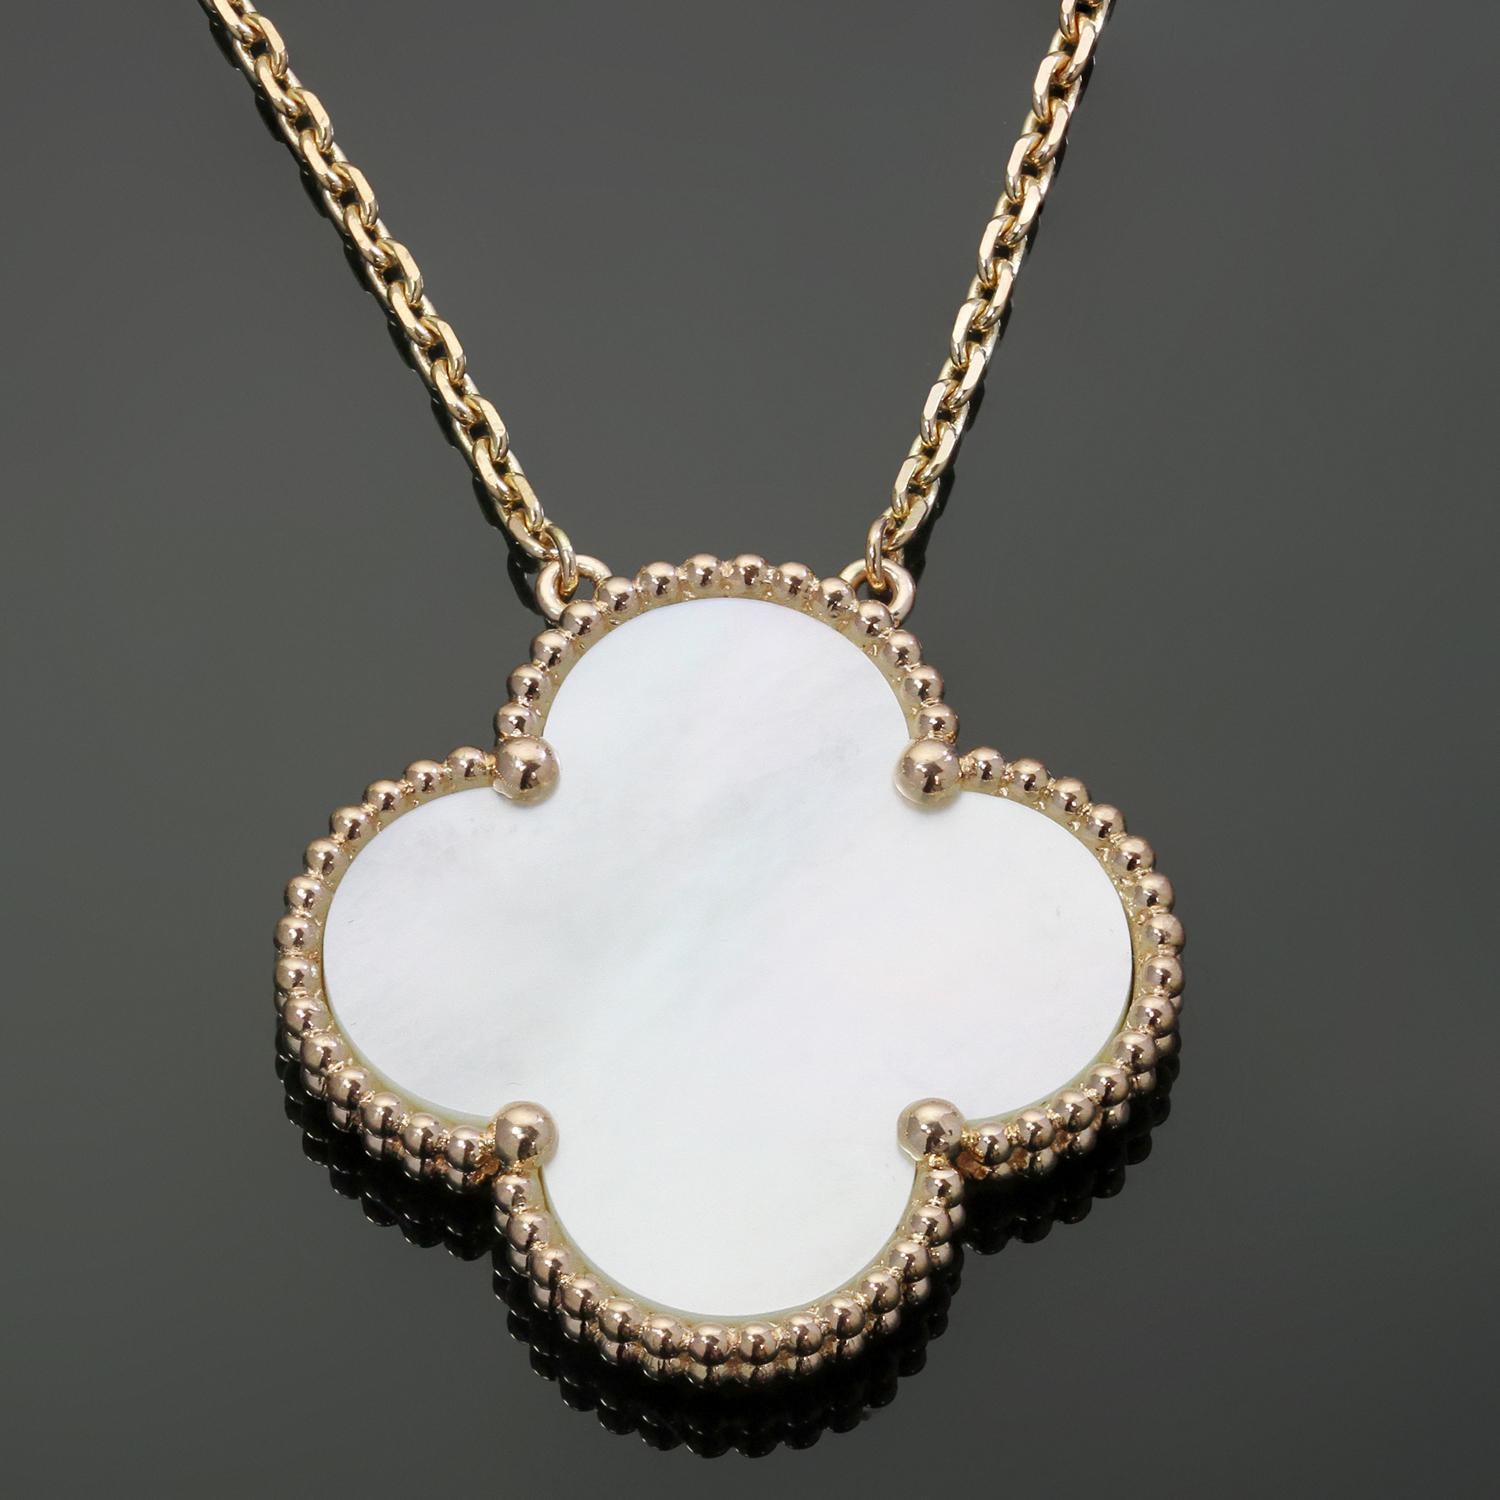 This elegant Van Cleef & Arpels necklace from the classic Magic Alhambra collection features an extra large beaded lucky clover pendant crafted in 18k rose gold and set with white mother-of-pearl. Made in France circa 2000s. Measurements: 1.02